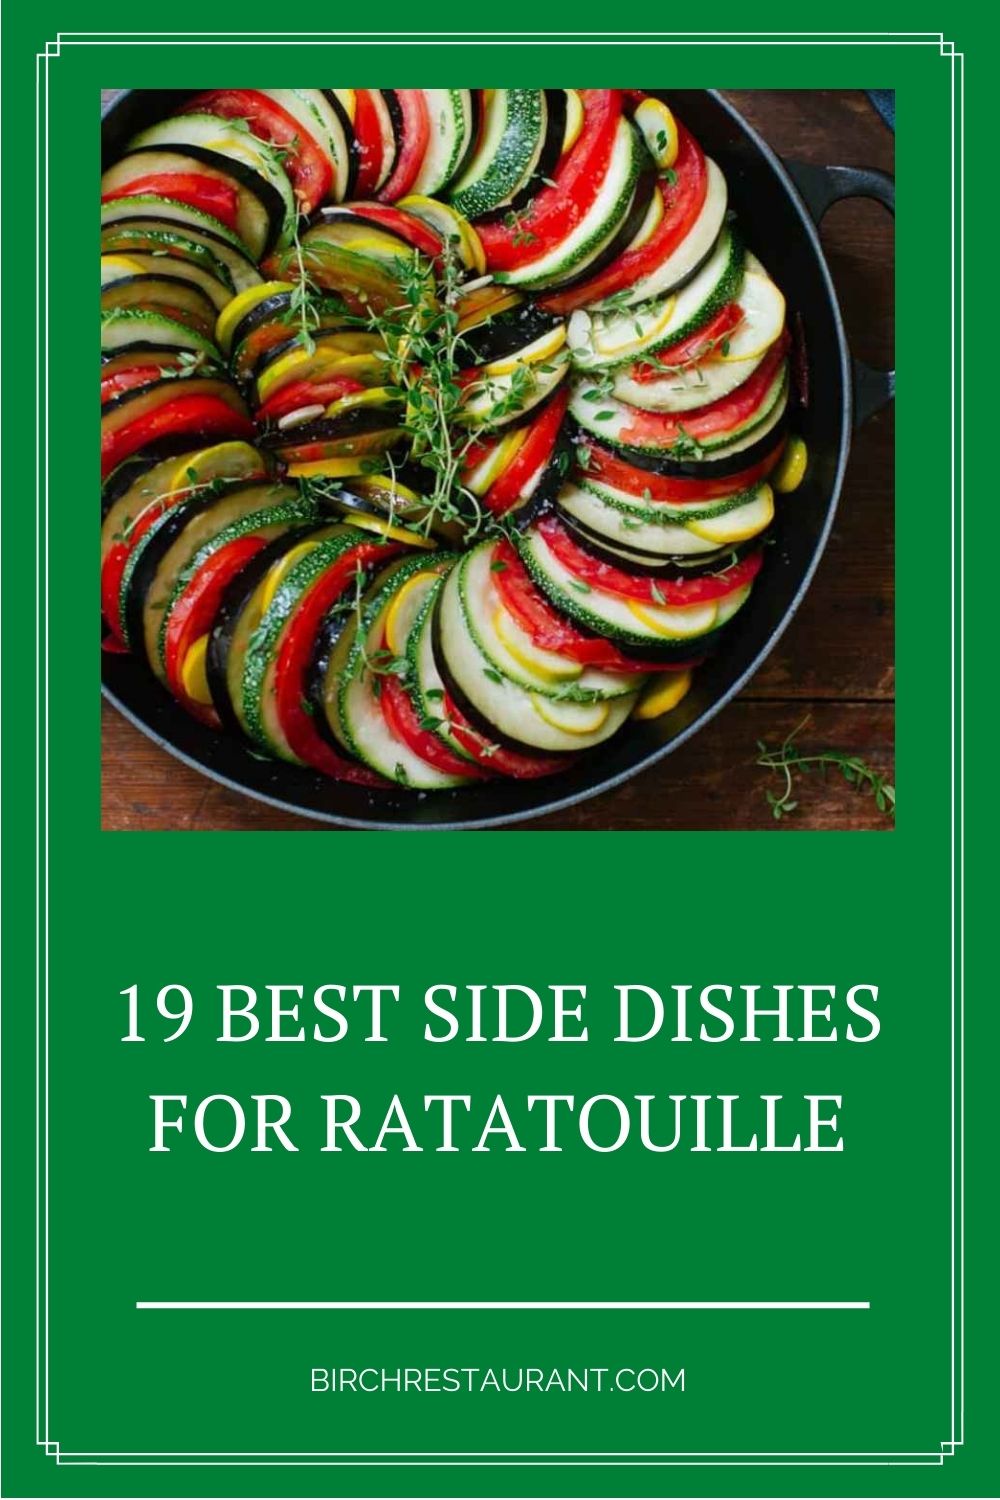 19 Best Side Dishes For Ratatouille